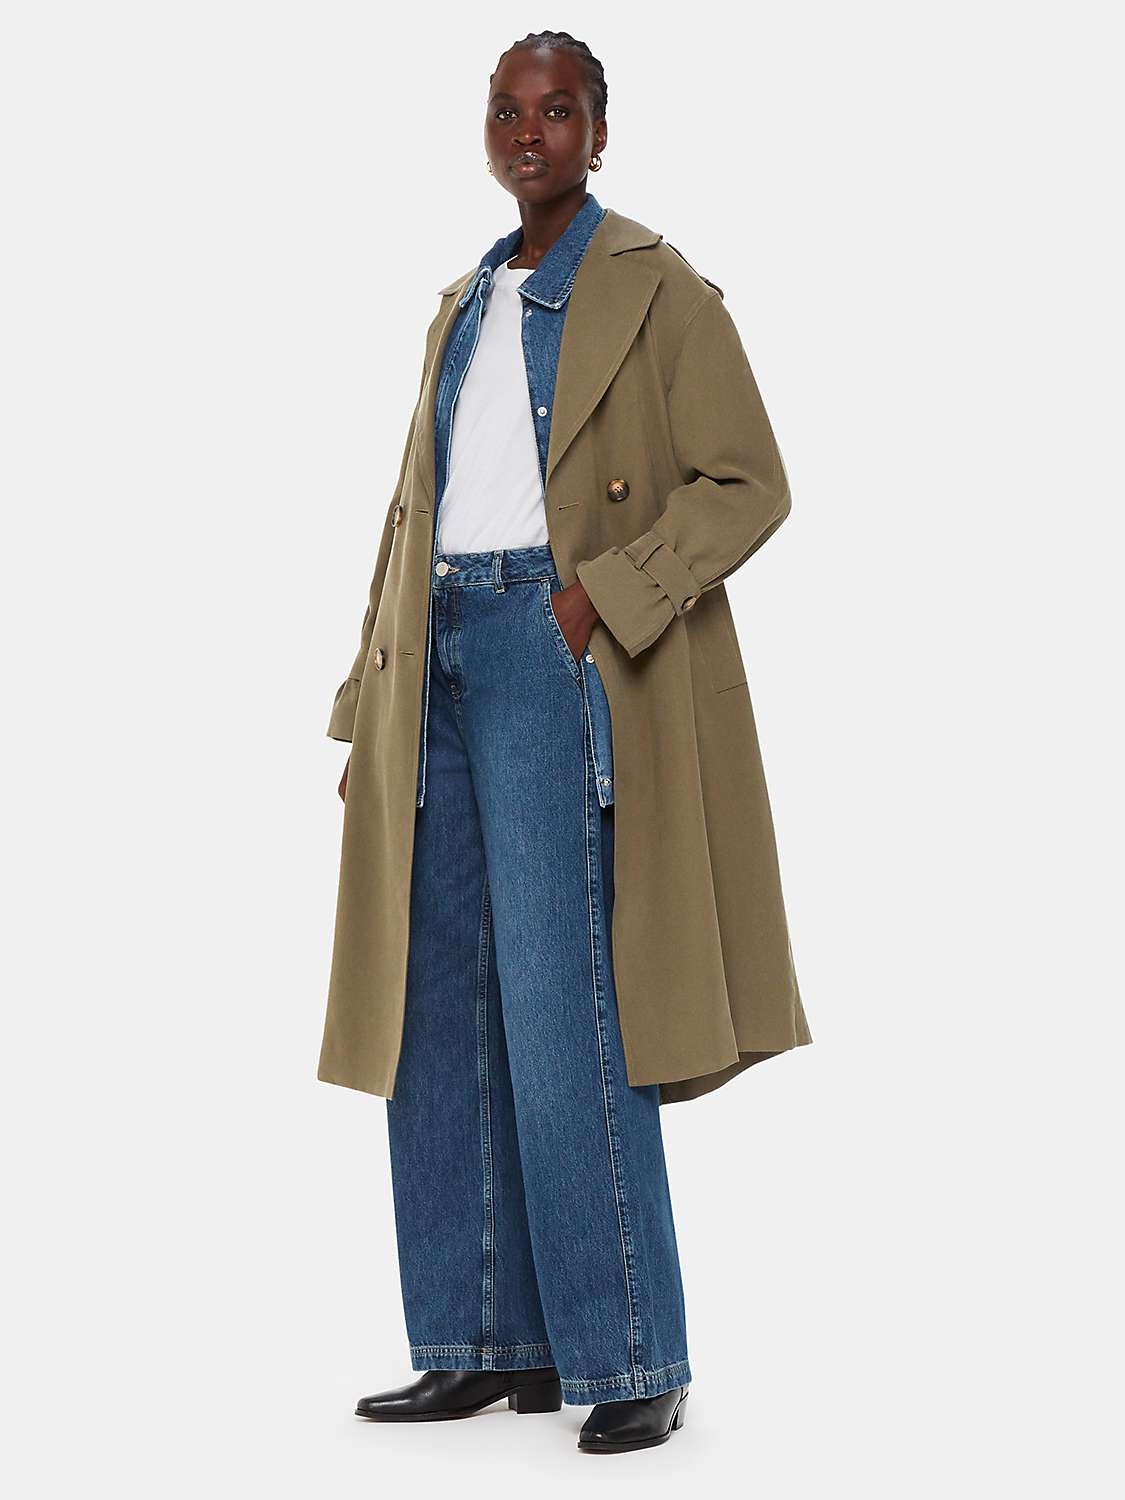 Buy Whistles Riley Trench Coat Online at johnlewis.com